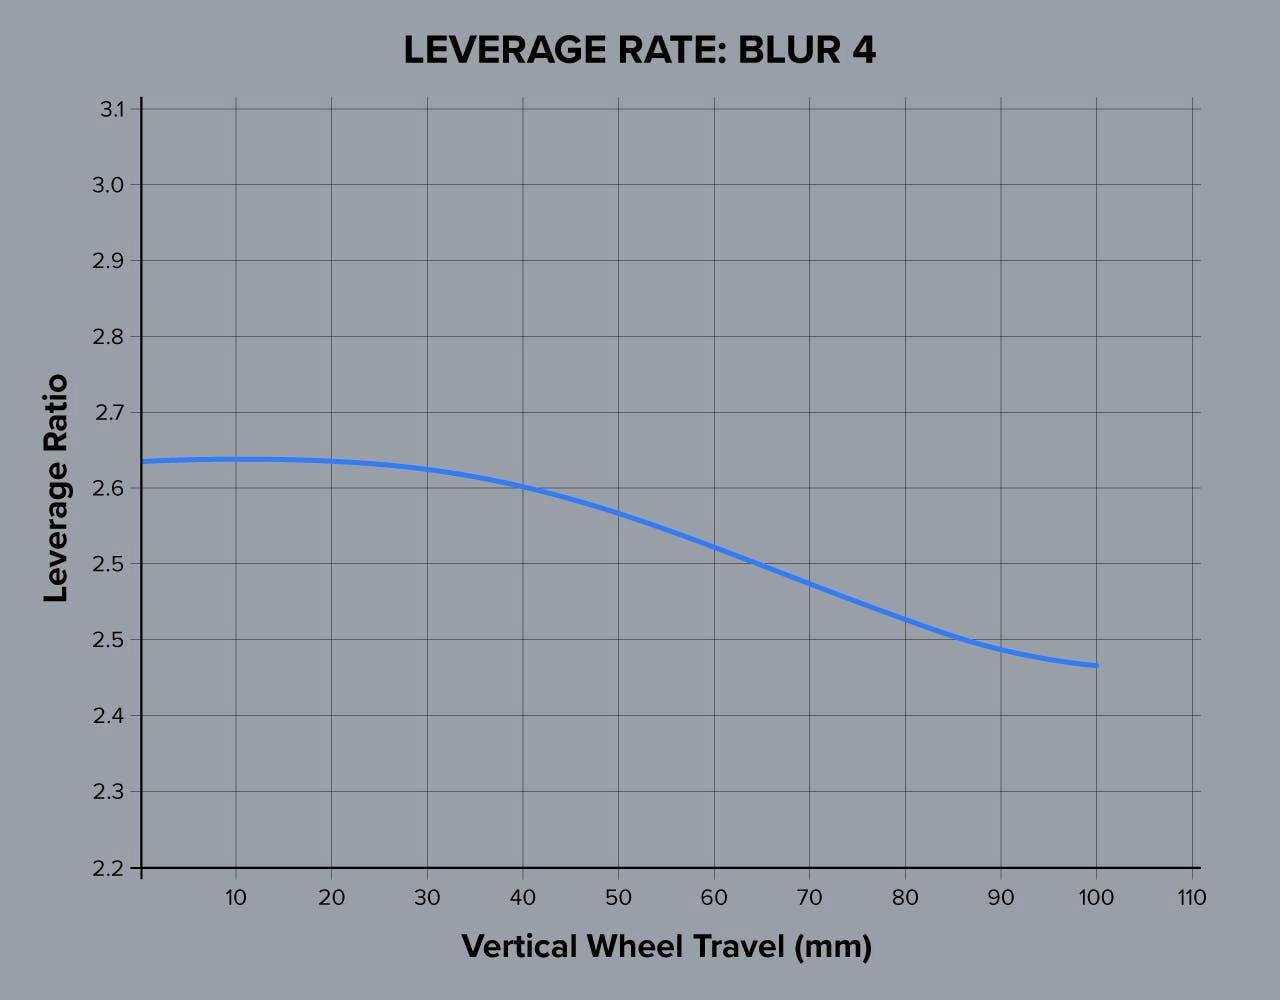 A graph of the leverage rate for a Blur 4 XC full suspension mountain bike